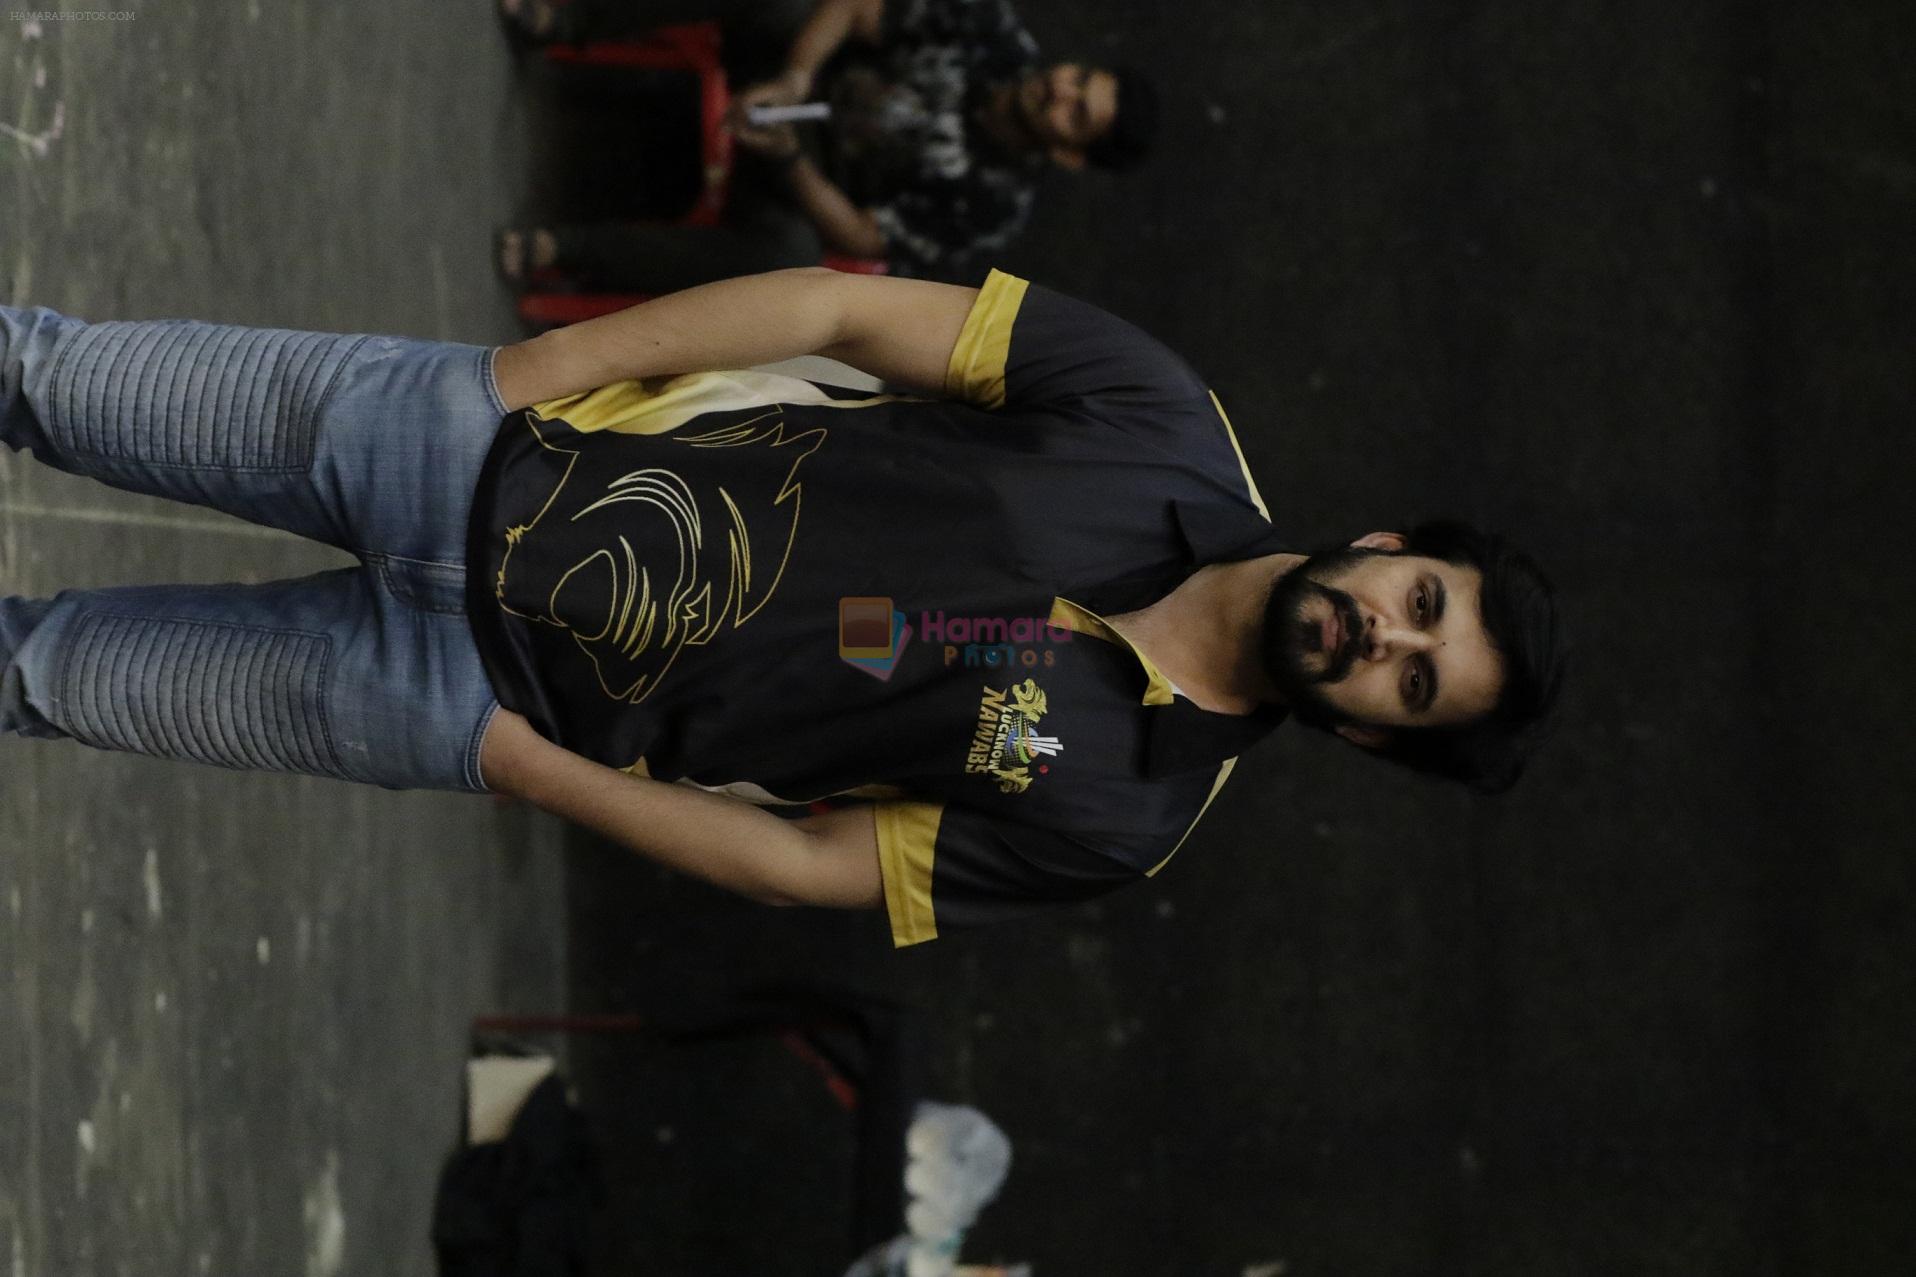 Ajay Chaudhary at the BCL Season 2 Practice session on 17th Jan 2016